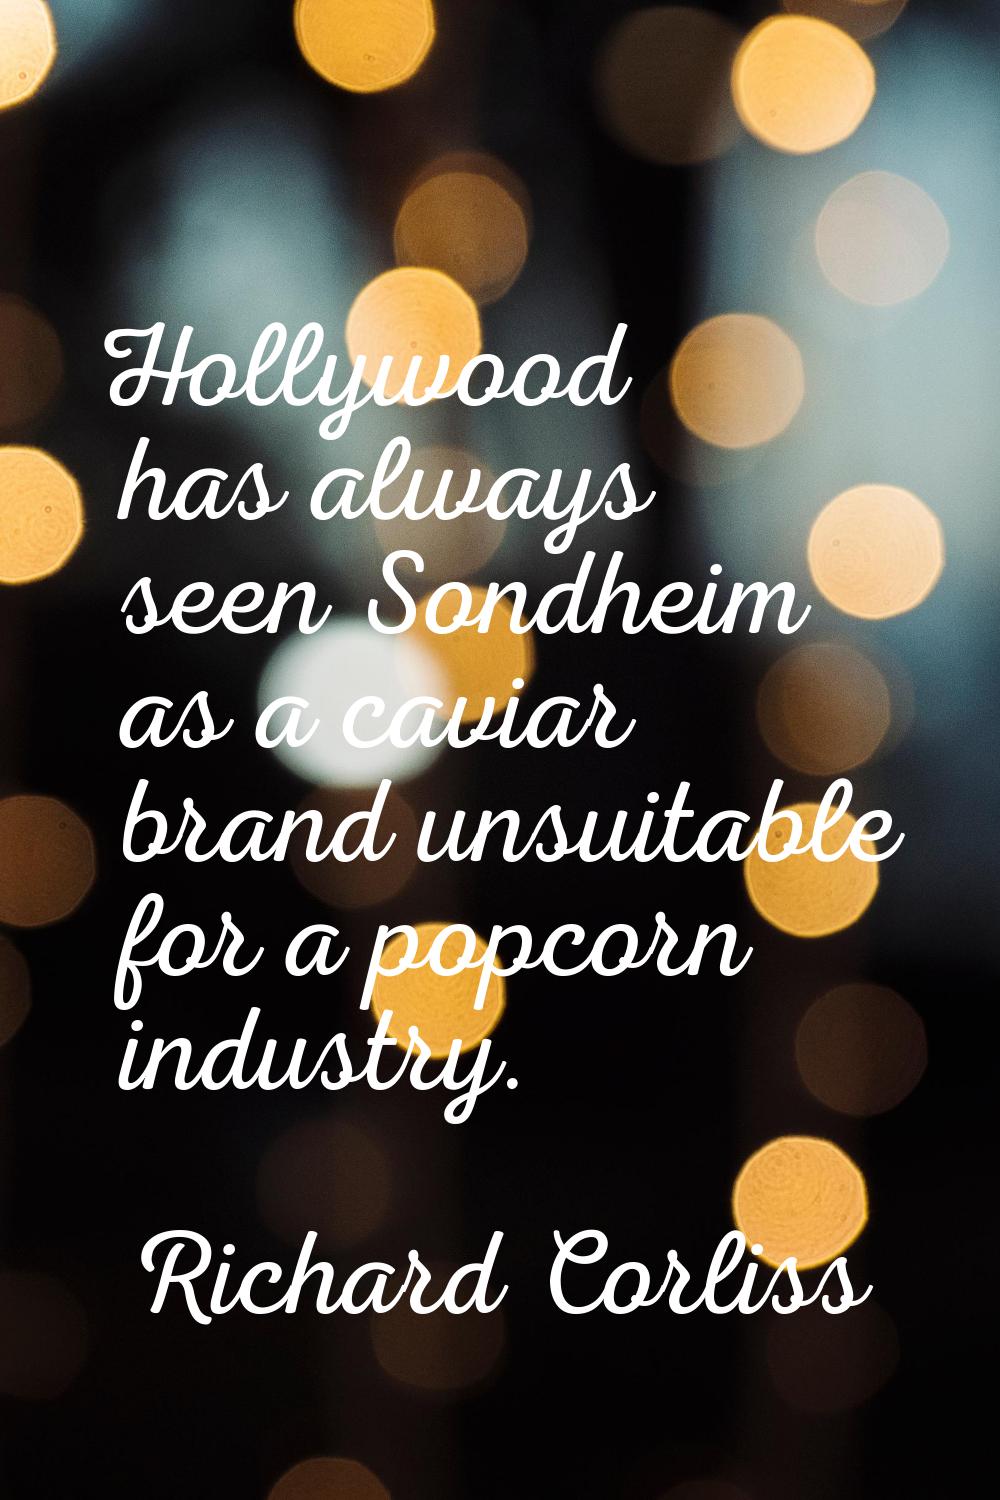 Hollywood has always seen Sondheim as a caviar brand unsuitable for a popcorn industry.